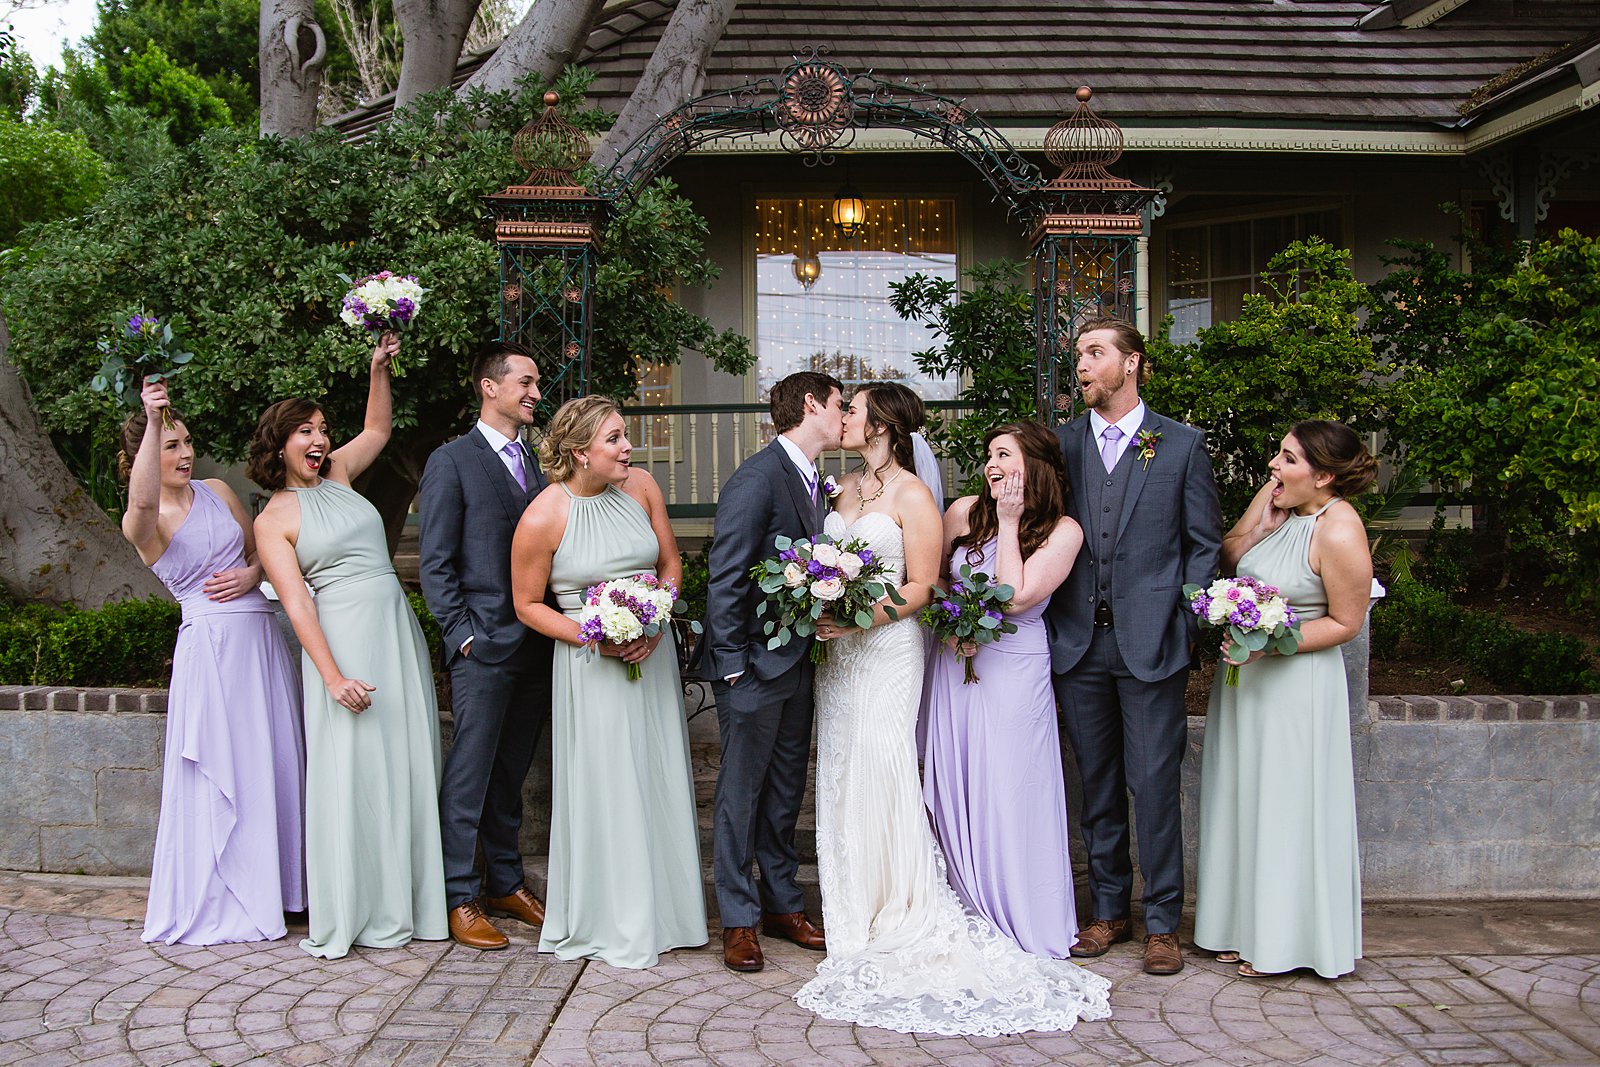 Mixed gender party having fun together at The Wright House weding by Arizona wedding photographer PMA Photography.